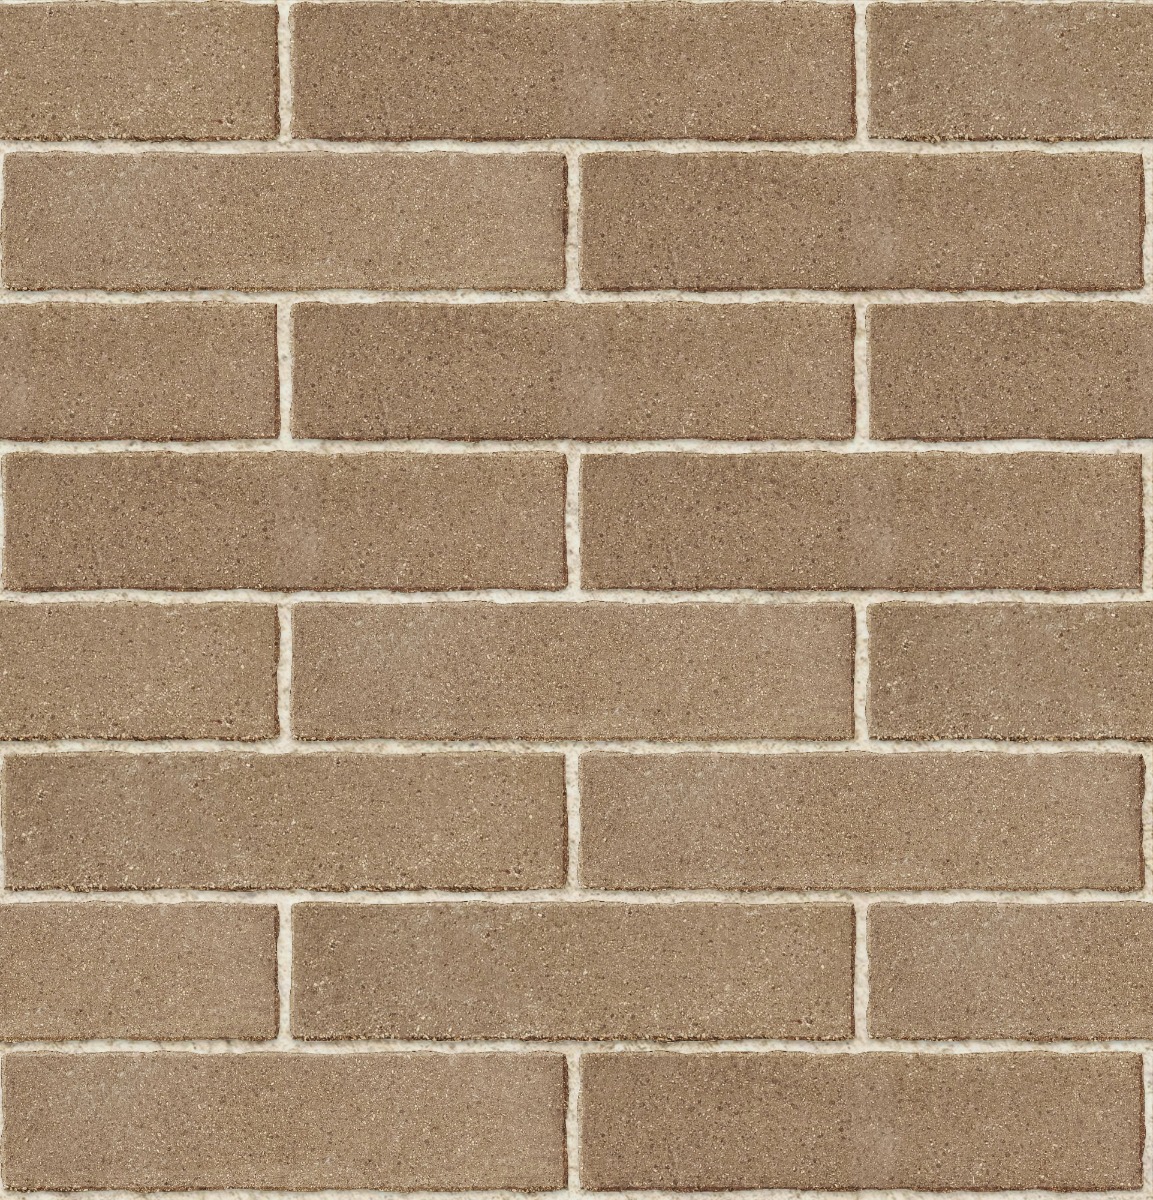 A seamless brick texture with pressed paver in drift units arranged in a Stretcher pattern